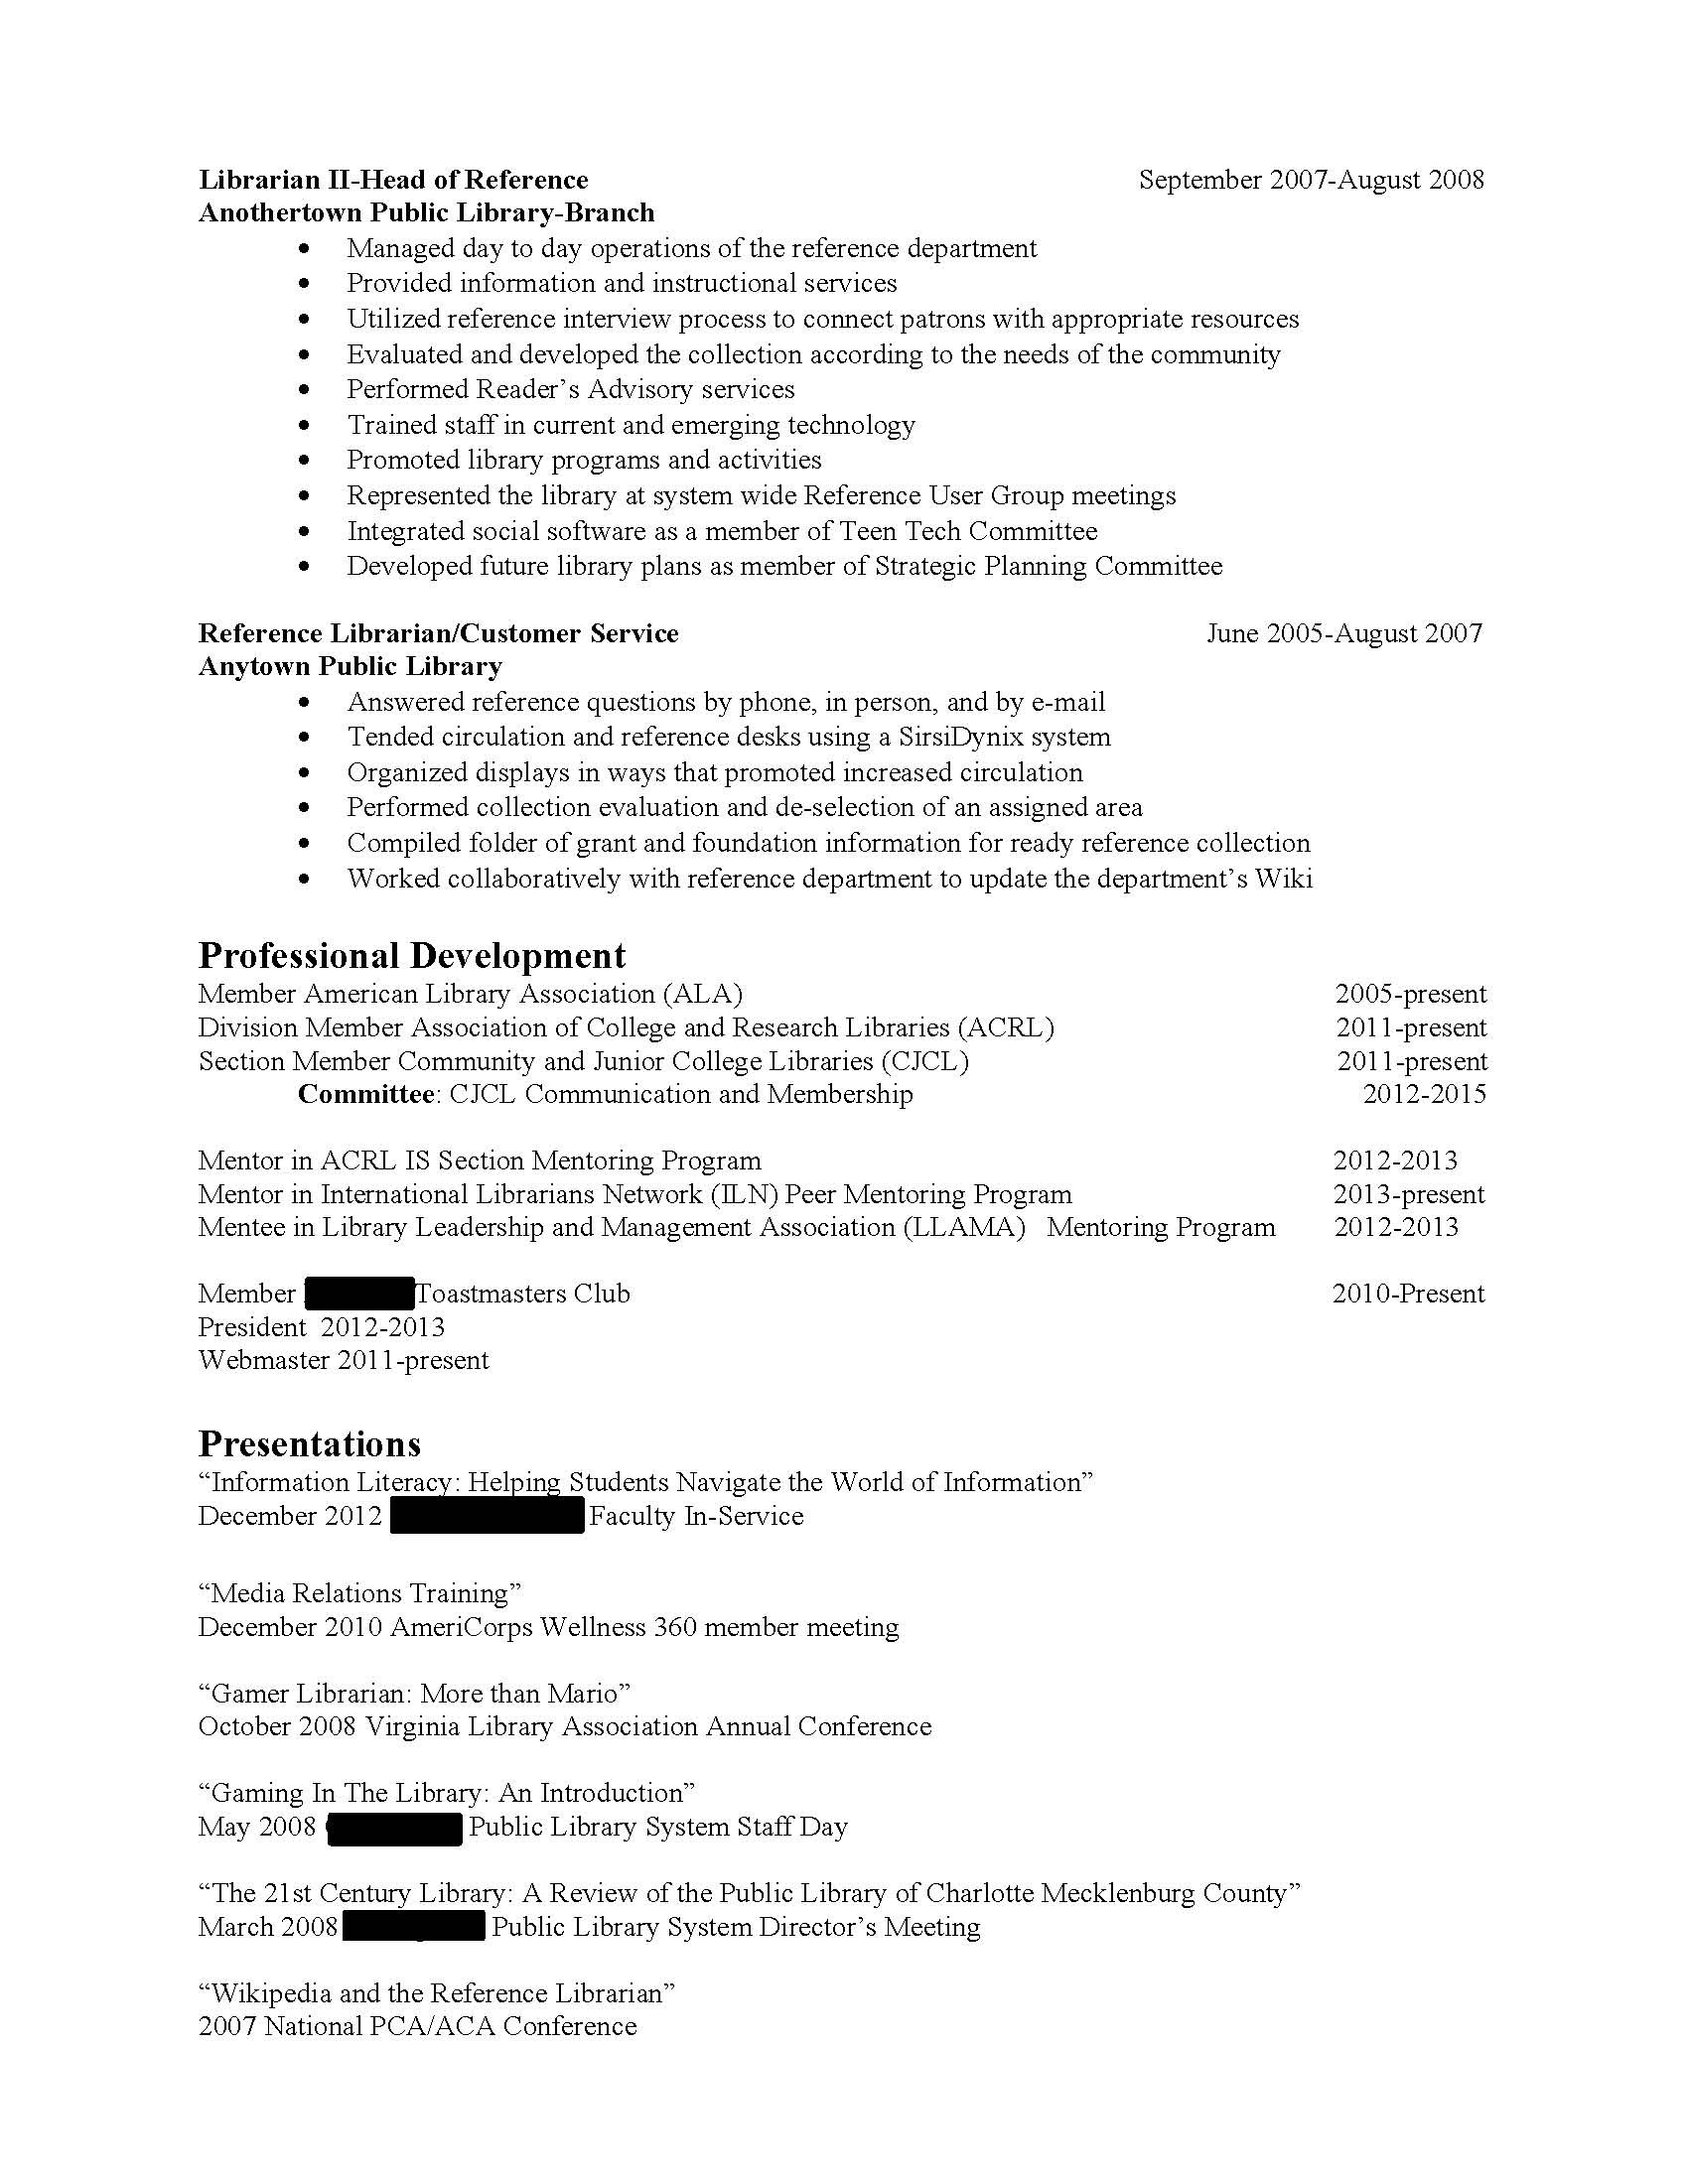 Americorps National and State Resume Sample Resume Review Hiring Librarians Page 6